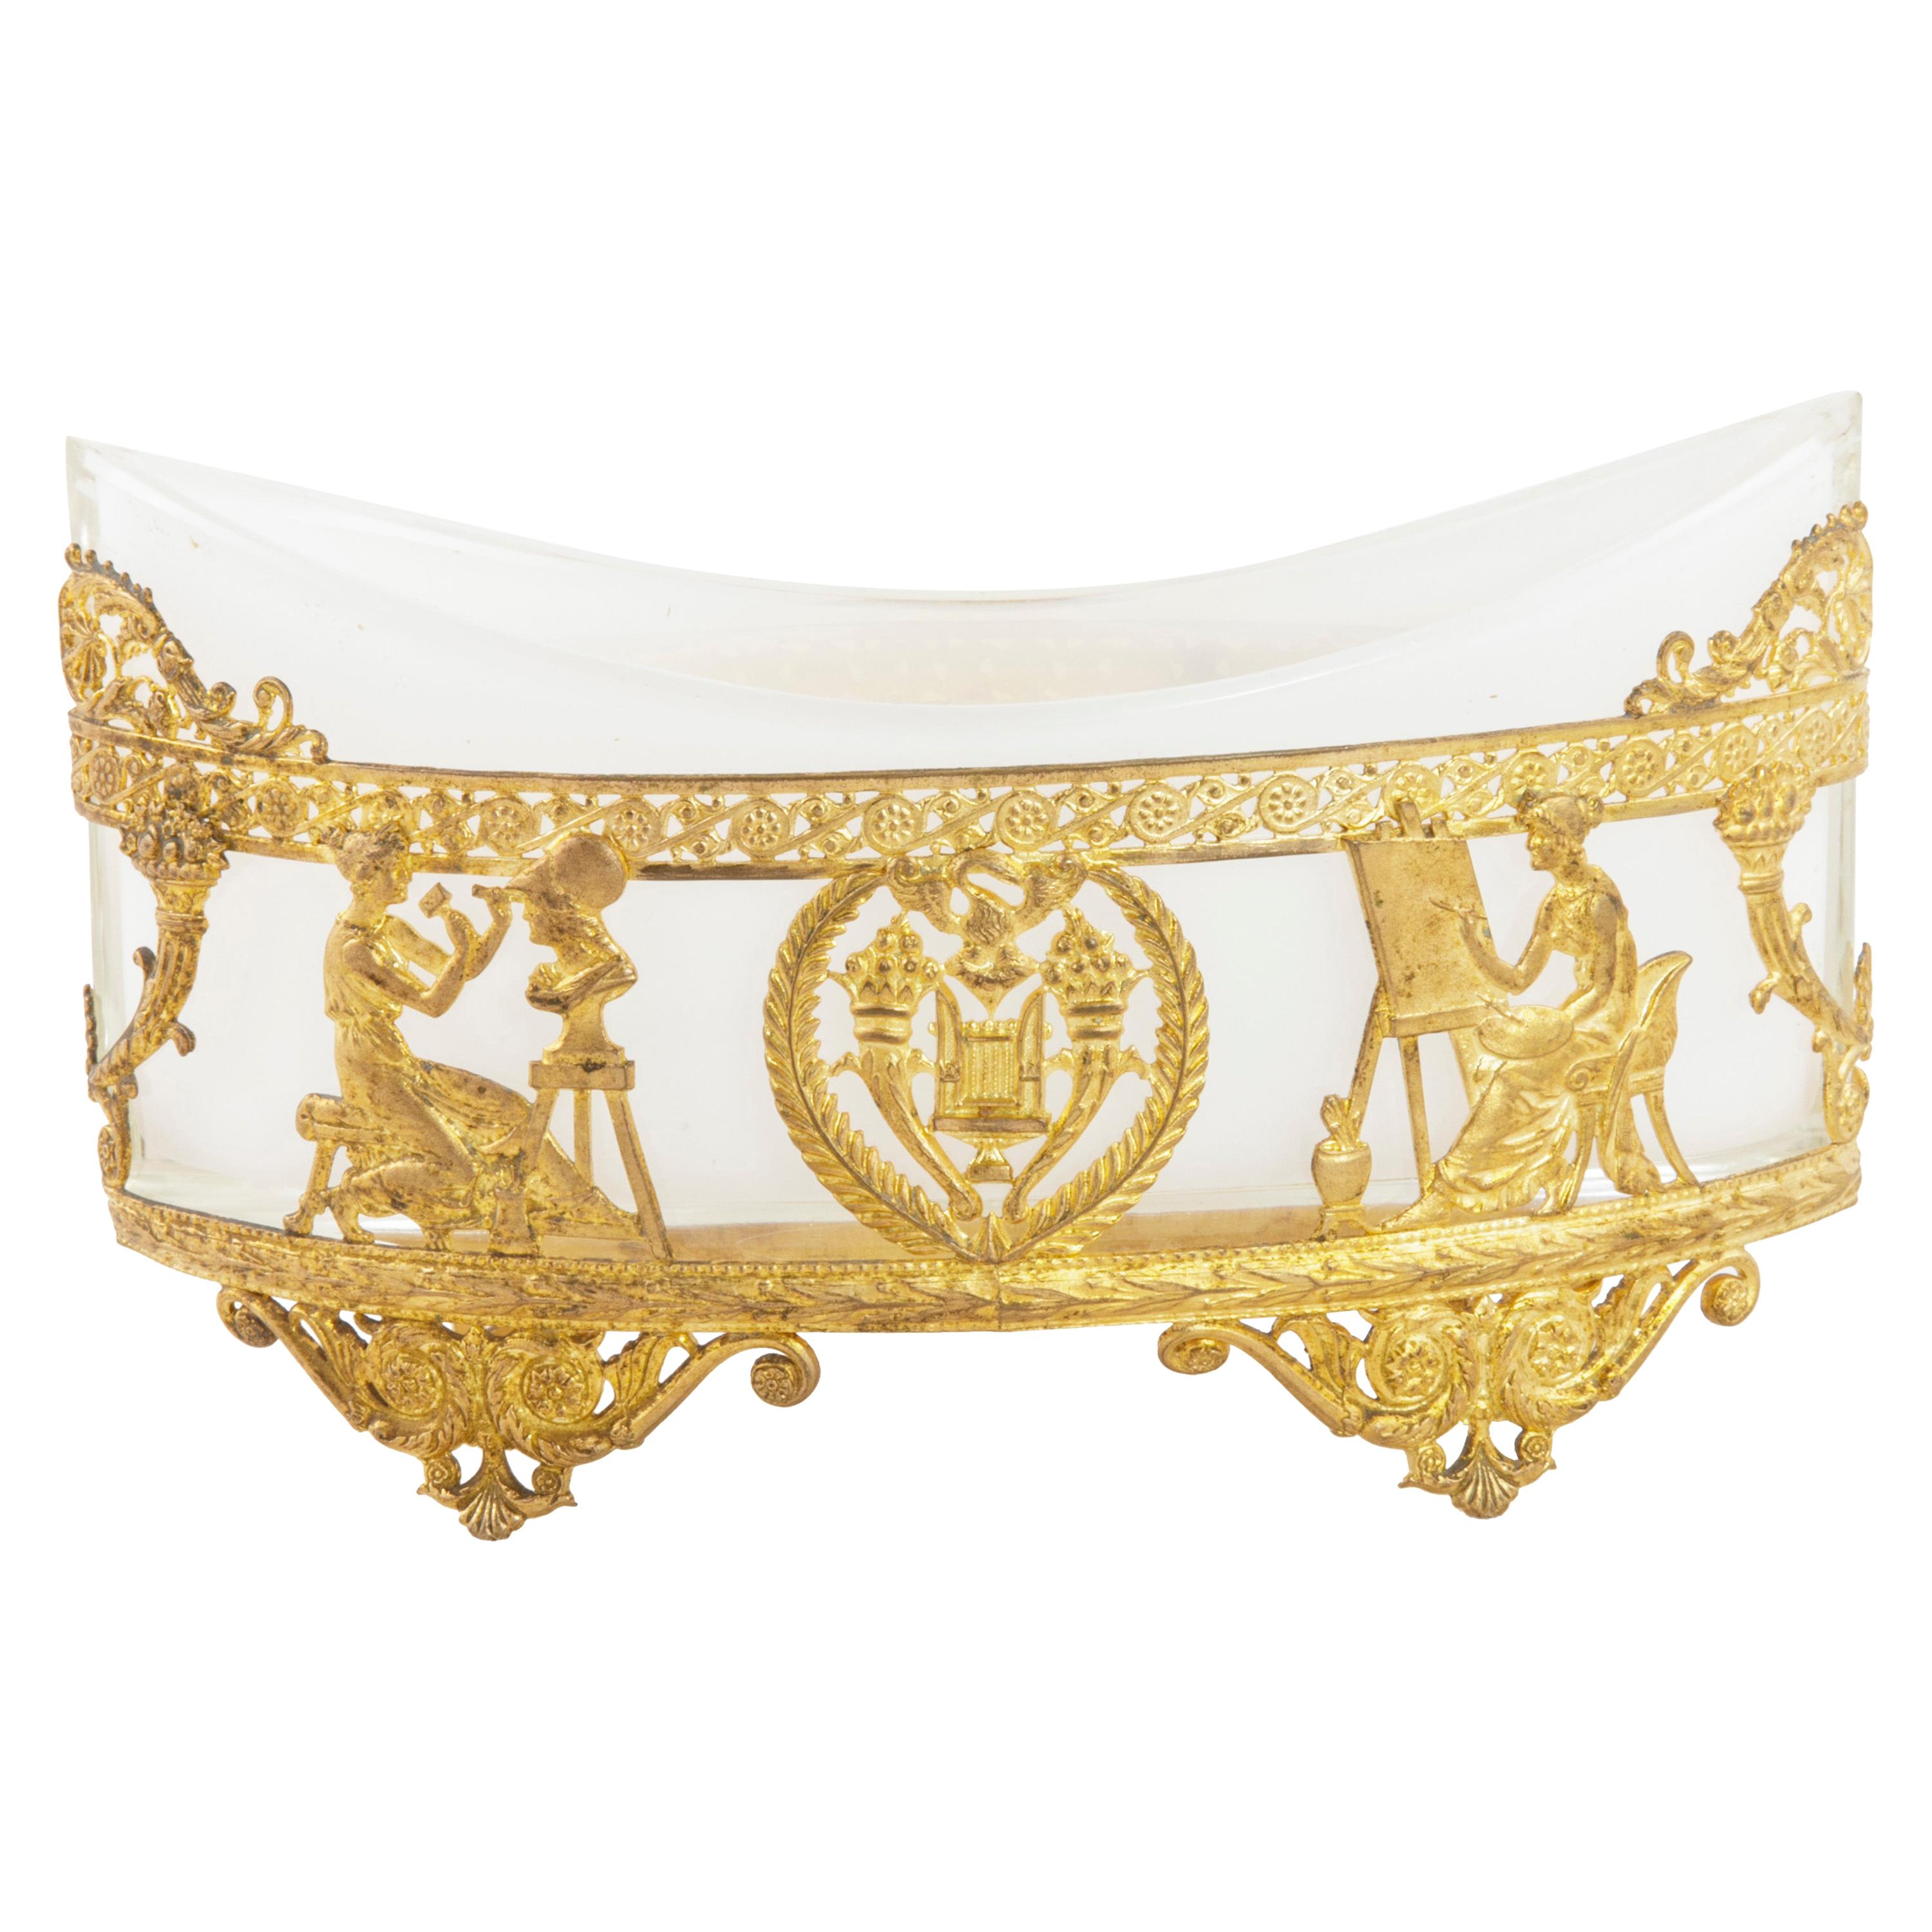 Late 19th Century French Empire Style Opaline Jewelry Dish with Gilt Bronze Base